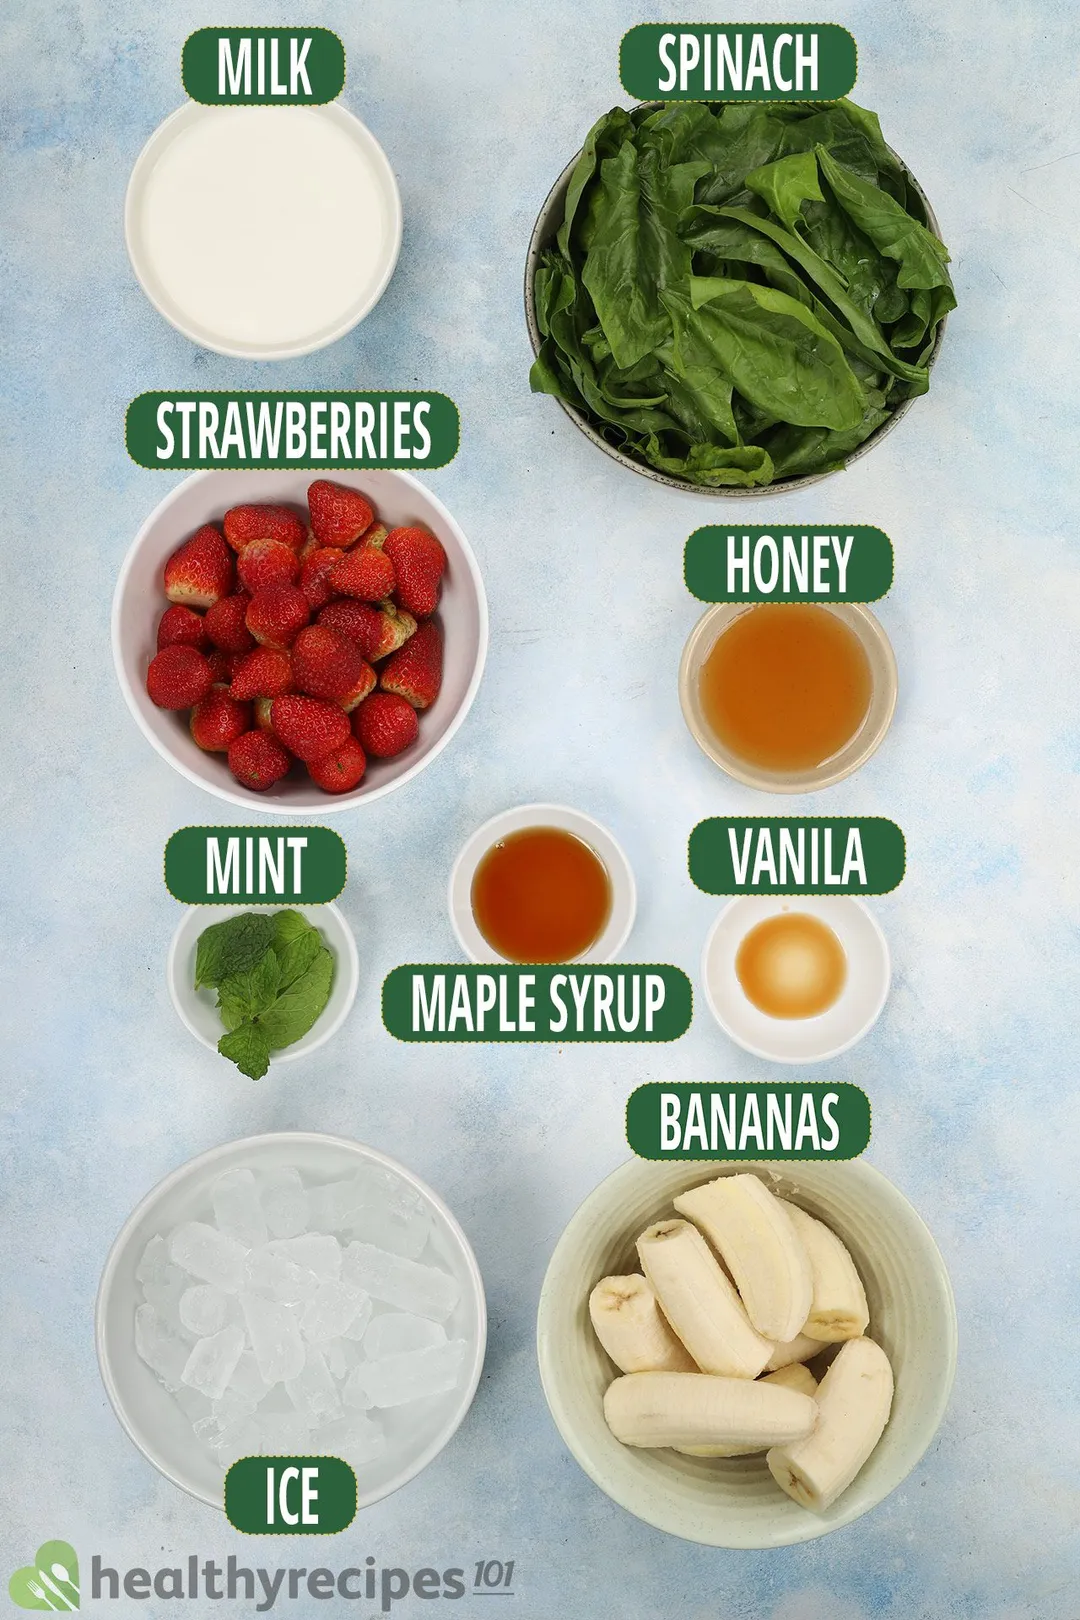 Ingredients for strawberry spinach banana smoothie, including fresh spinach, strawberries, sliced bananas, ice, honey, and other smoothie essentials.